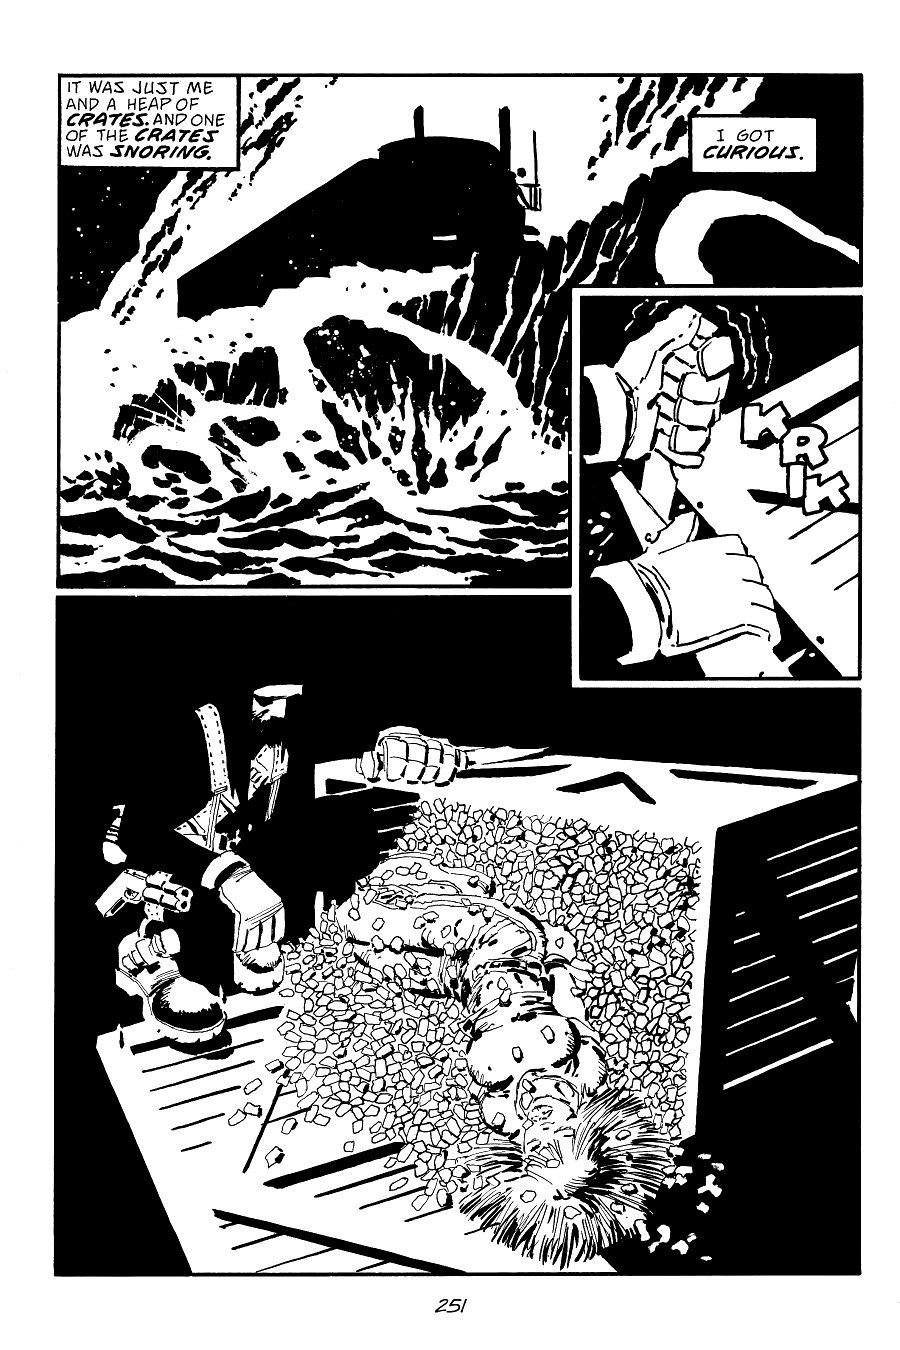 page 251 of sin city 7 hell and back